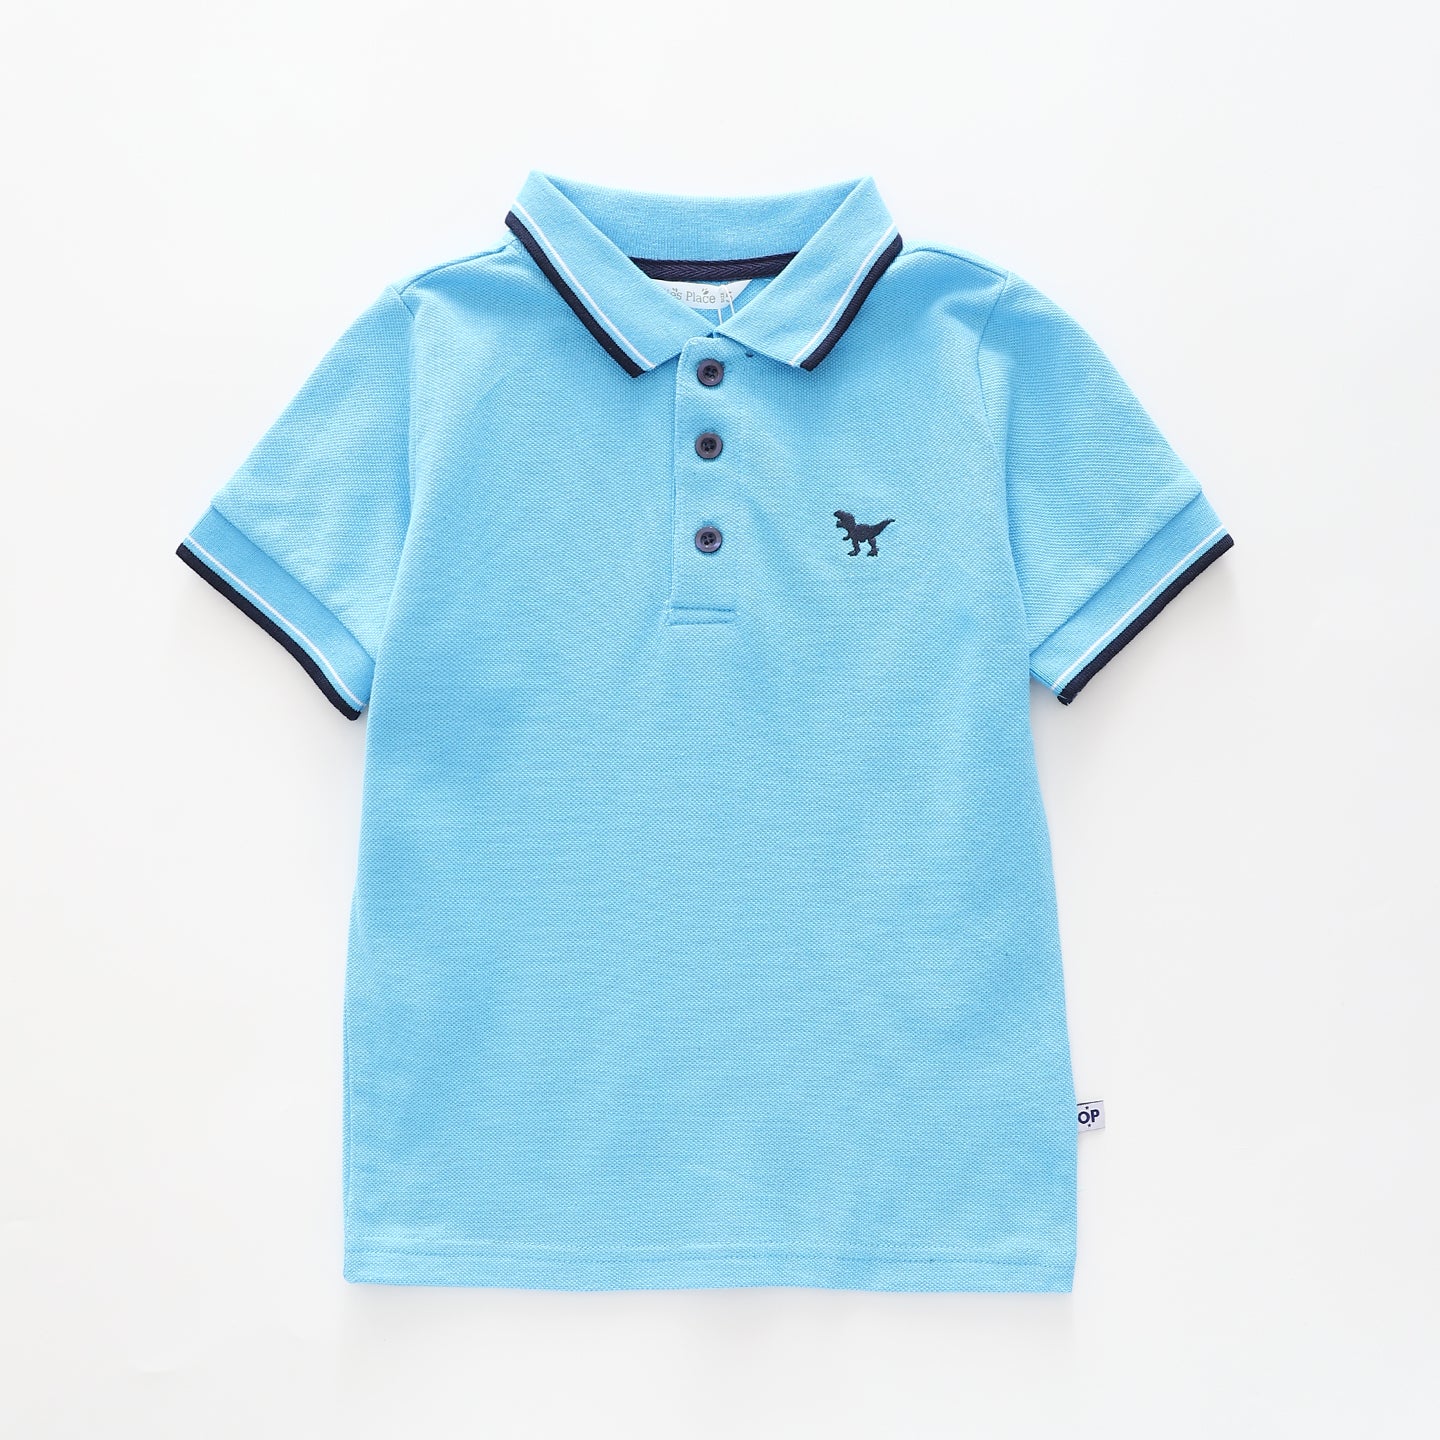 Boy's Sky Blue Polo Shirt With Sailboat Embroidery